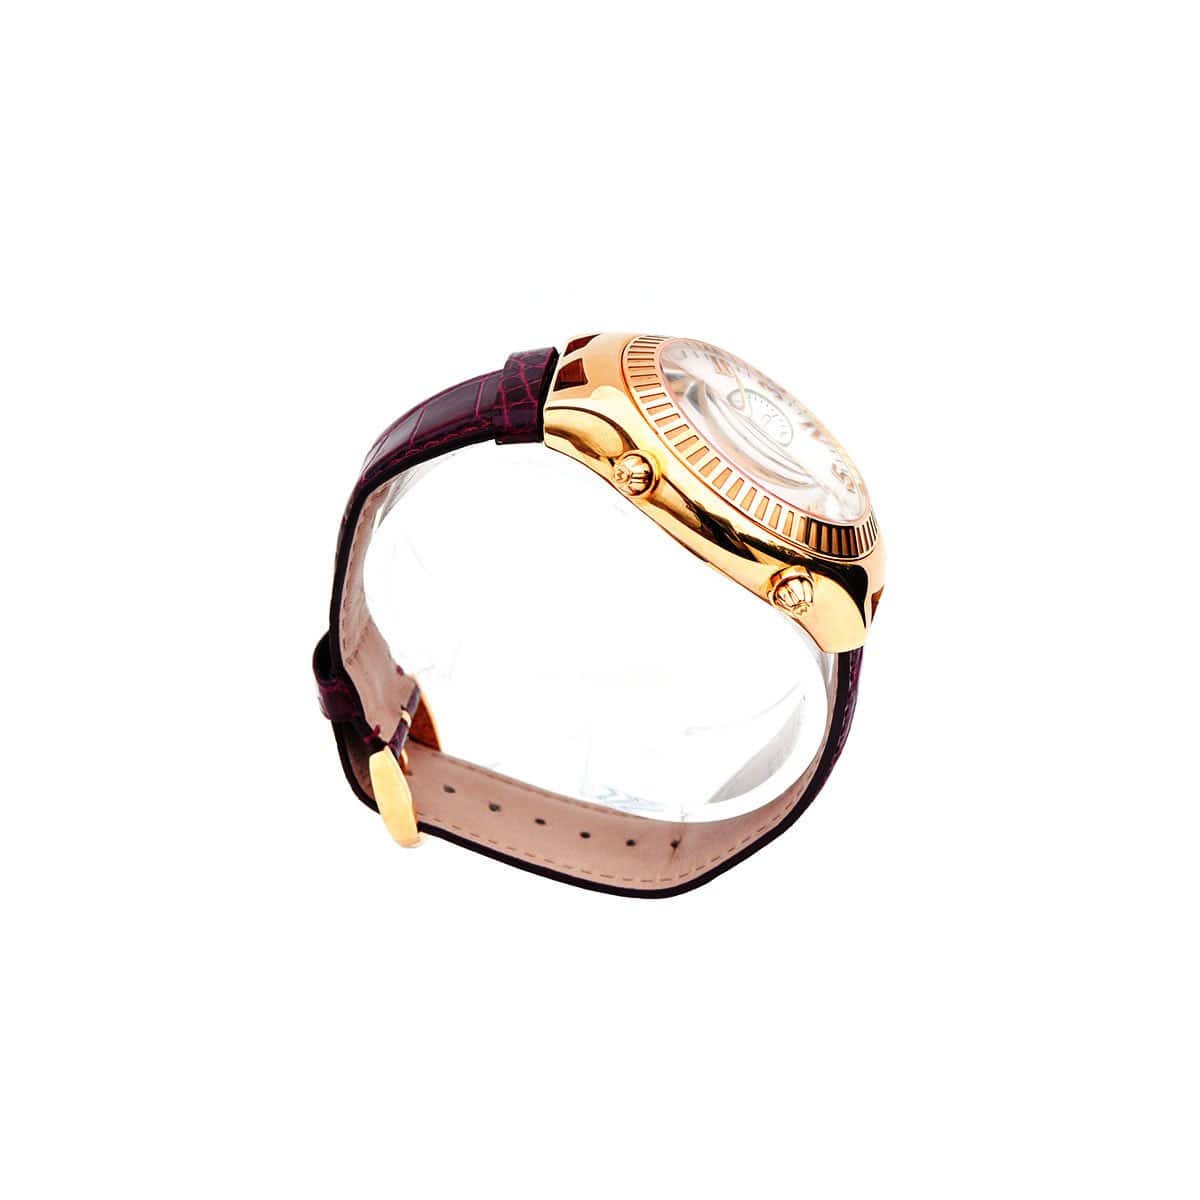 CHRIS AIRE PARLAY 50MM AMBIDEXTROUS - Chris Aire Fine Jewelry & Timepieces